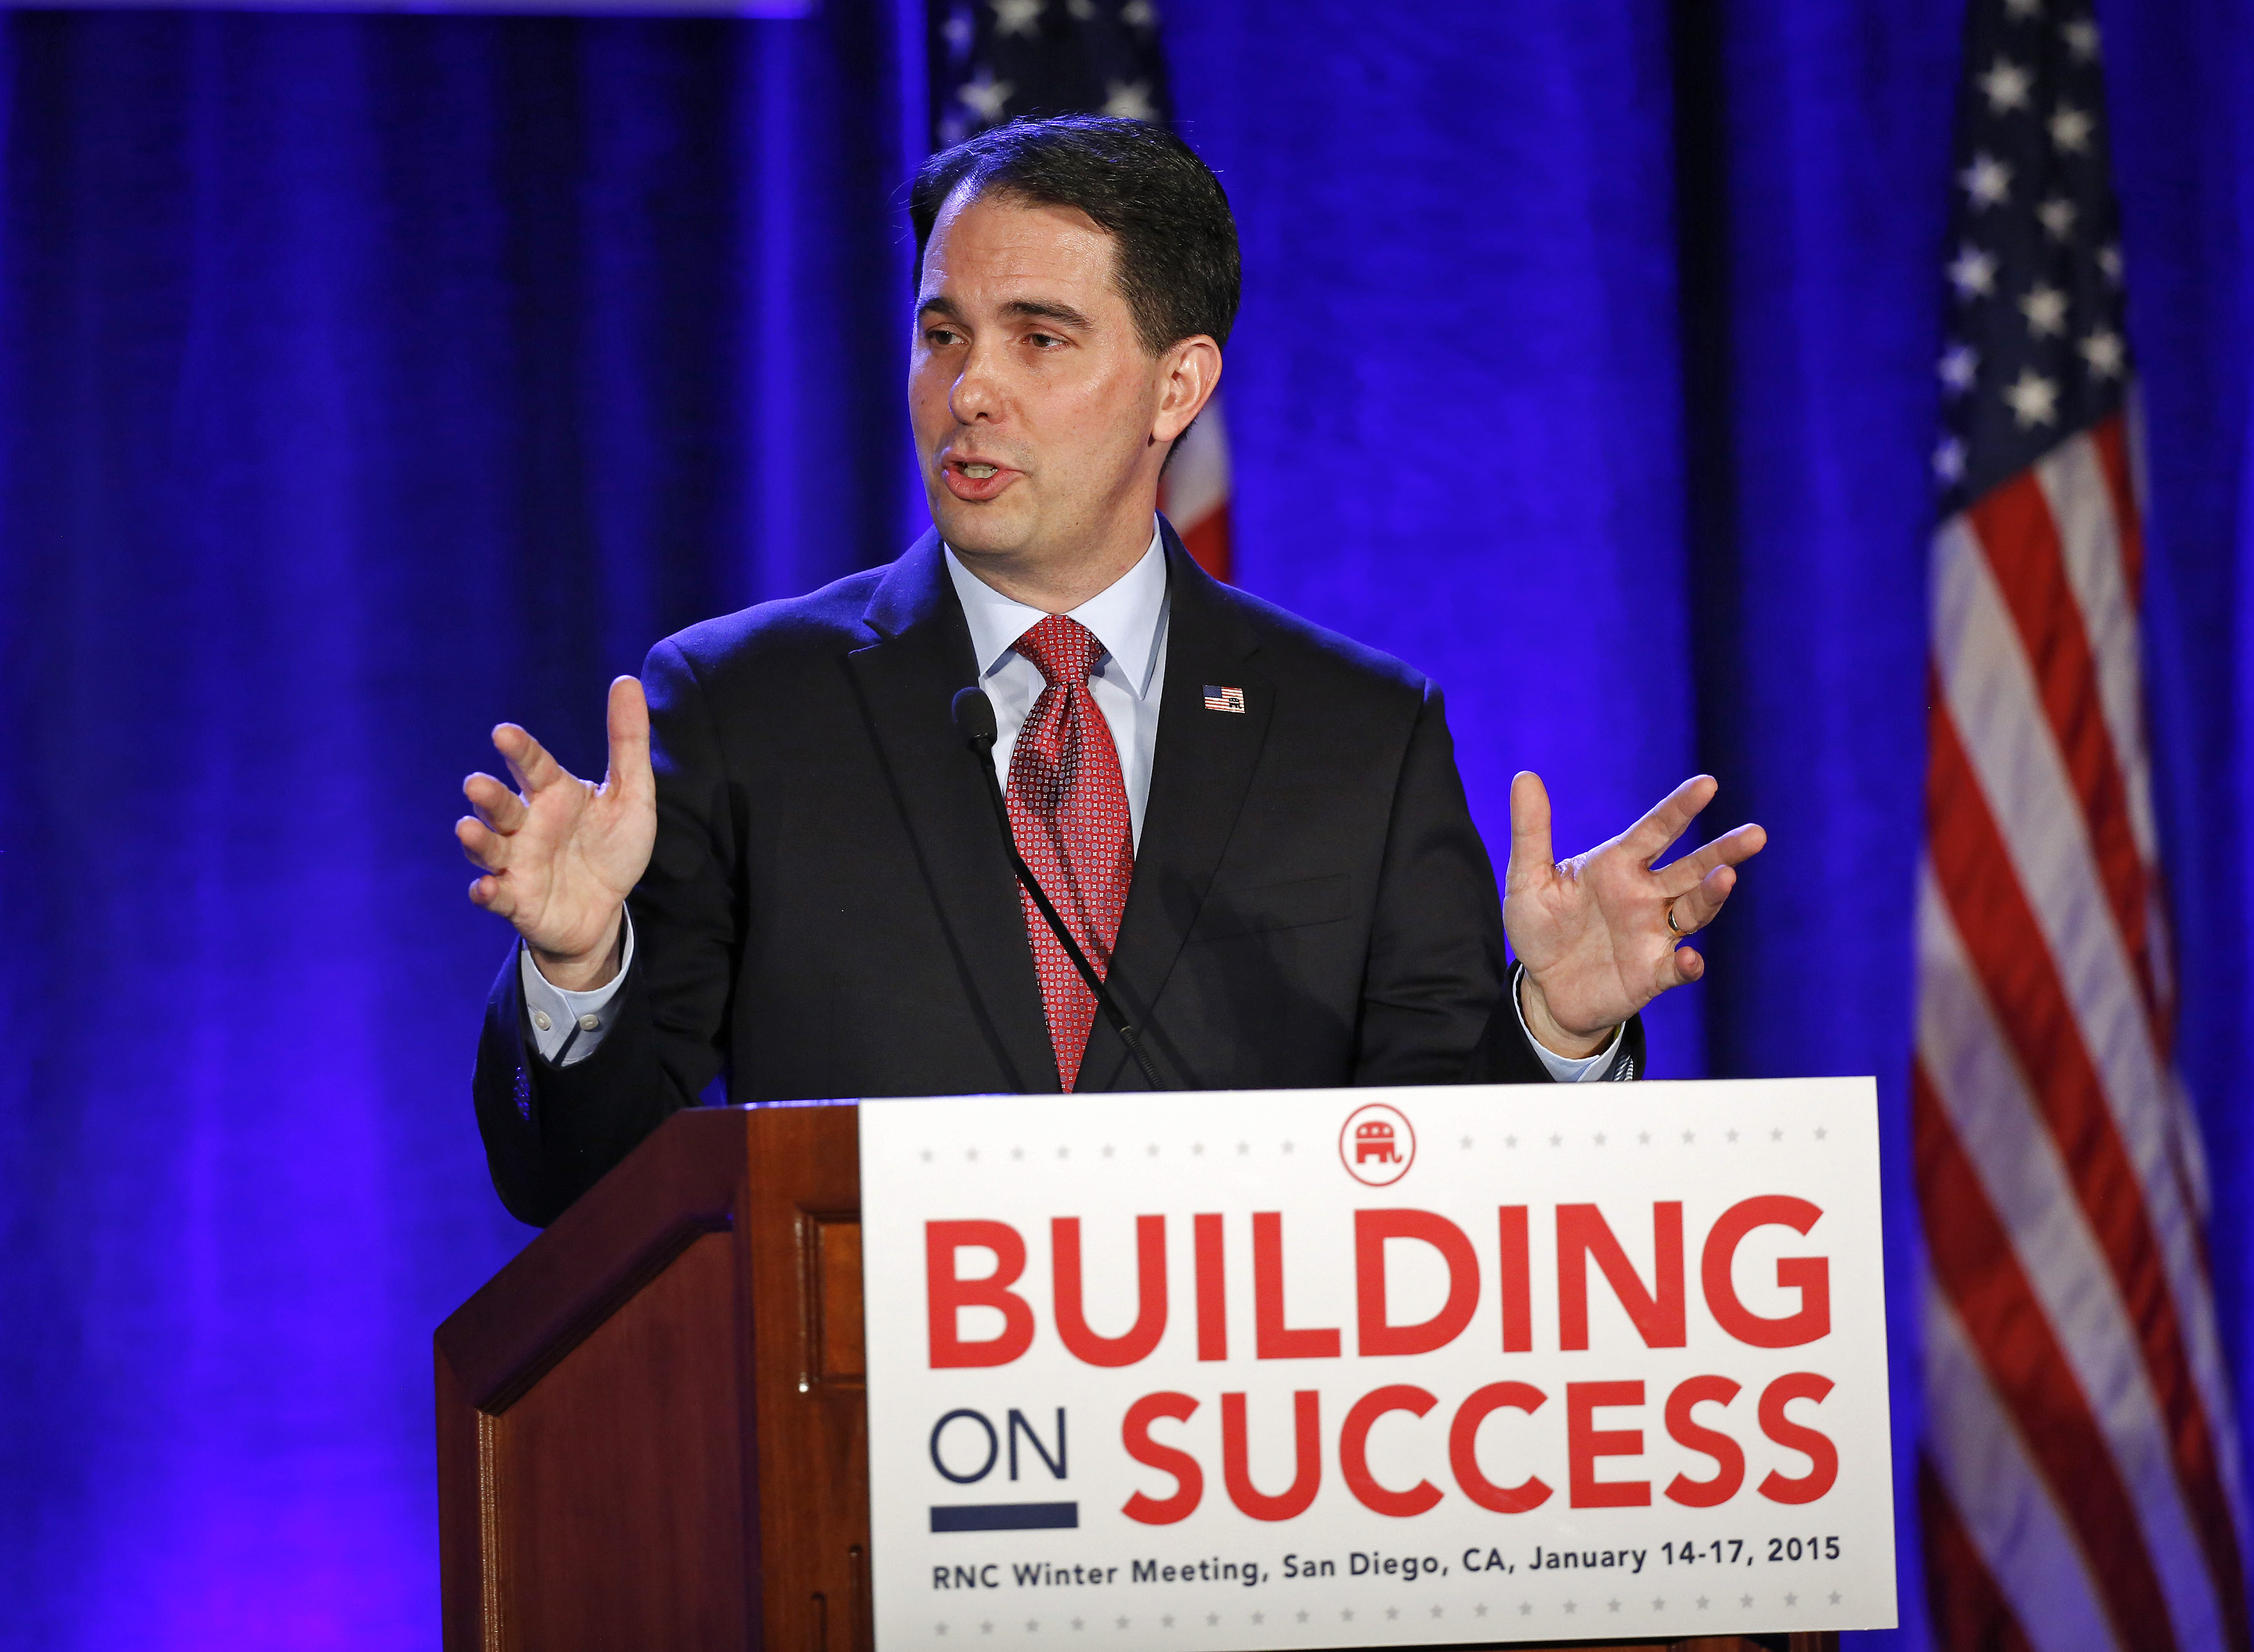 Wisconsin Governor Scott Walker takes the stage to address fellow Republicans at a dinner during the Republican National Committtee's "Building on Success" winter meeting in San Diego on Jan. 15, 2015 (Earnie Grafton—Reuters)